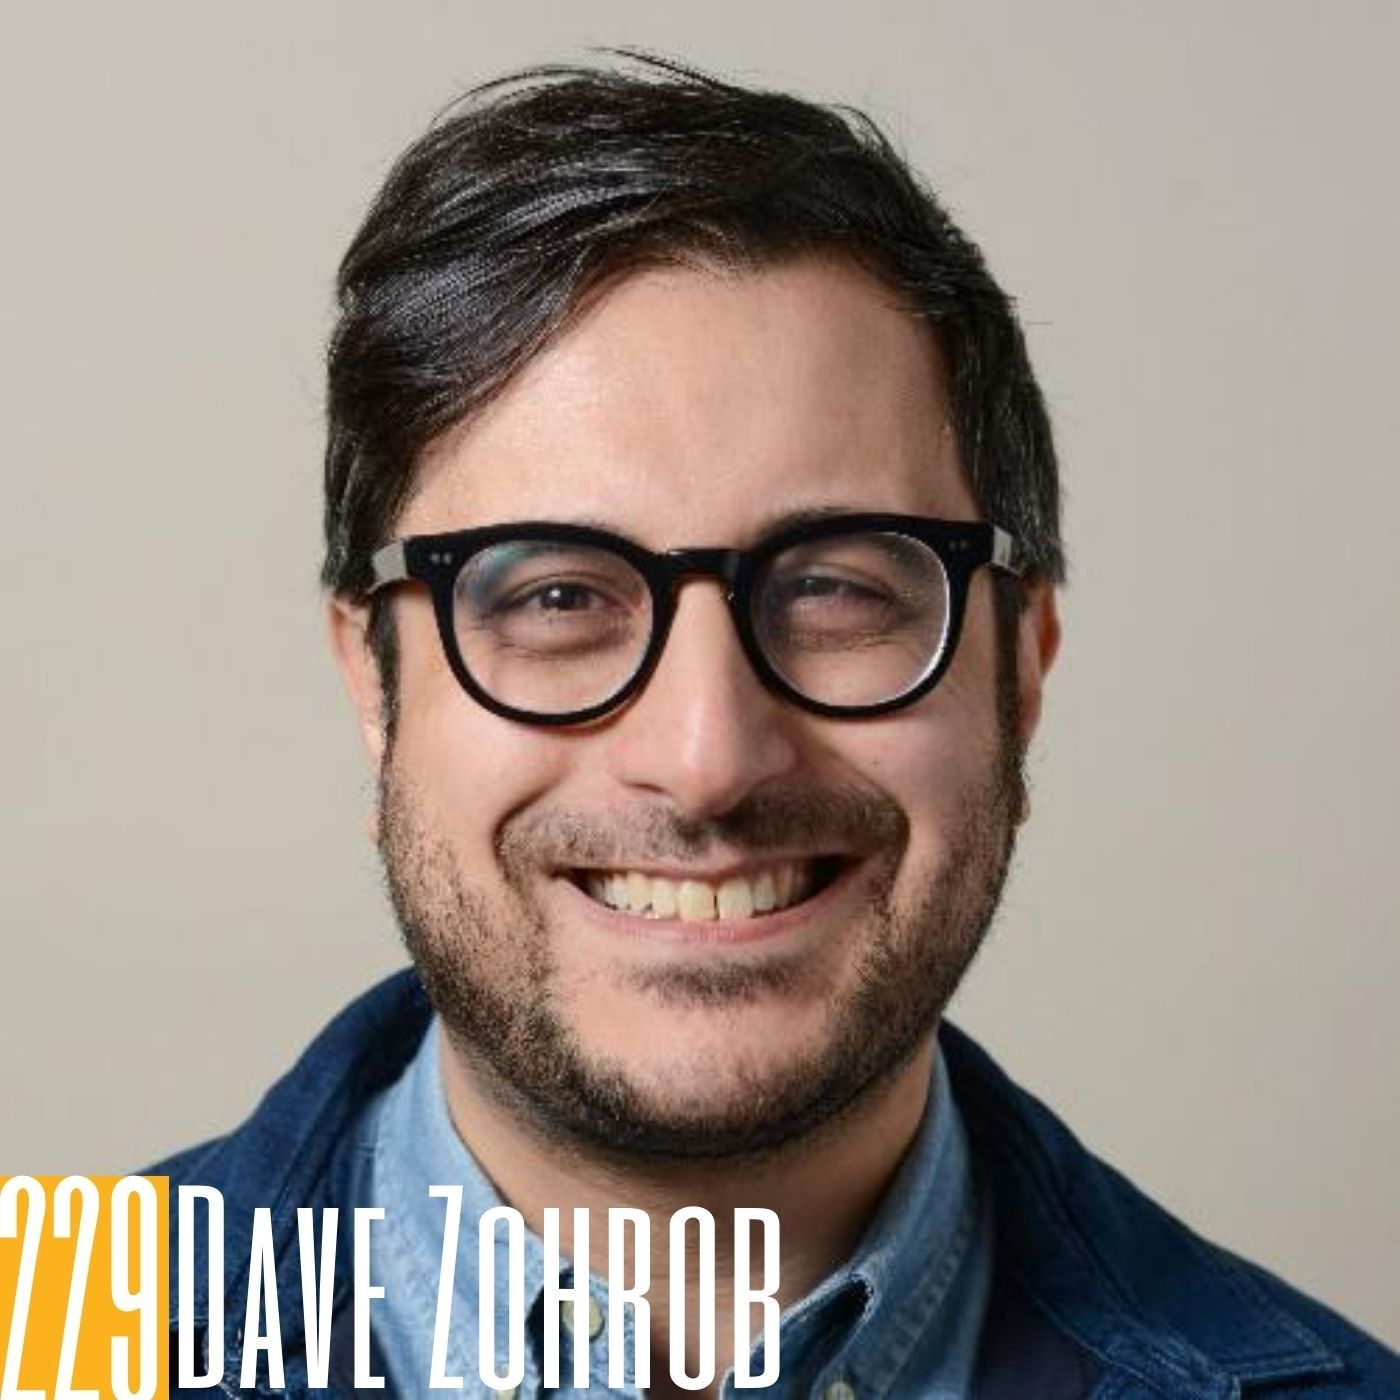 229 Dave Zohrob - An Analytical Approach to Podcasting